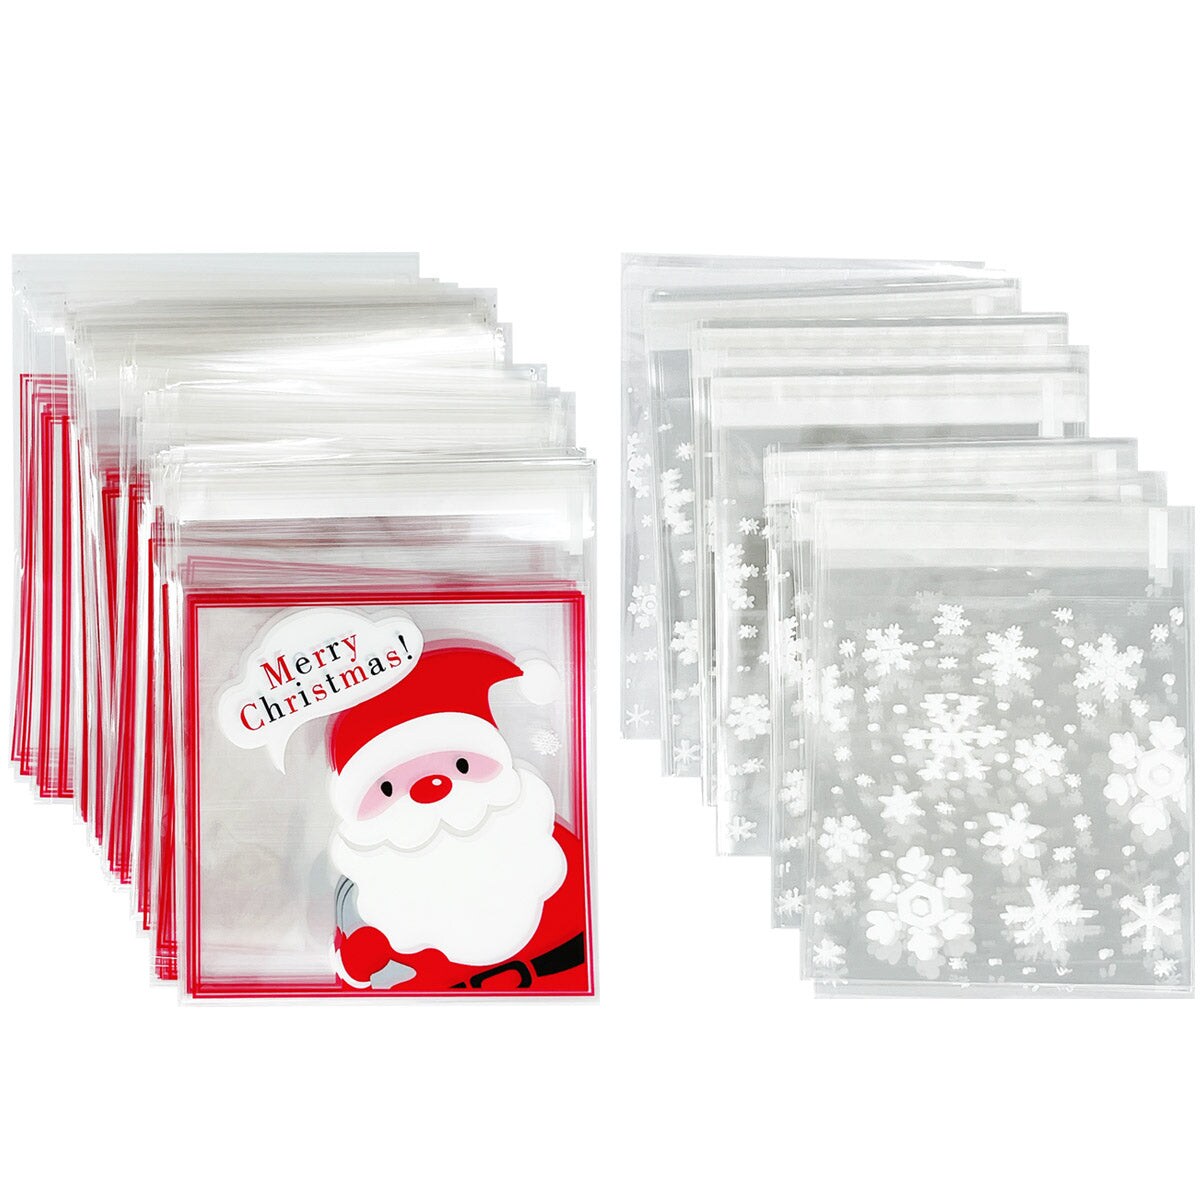 Wrapables Transparent Self-Adhesive 4" x 4" Candy and Cookie Bags, Favor Treat Bags for Christmas Parties and Holidays (200pcs)